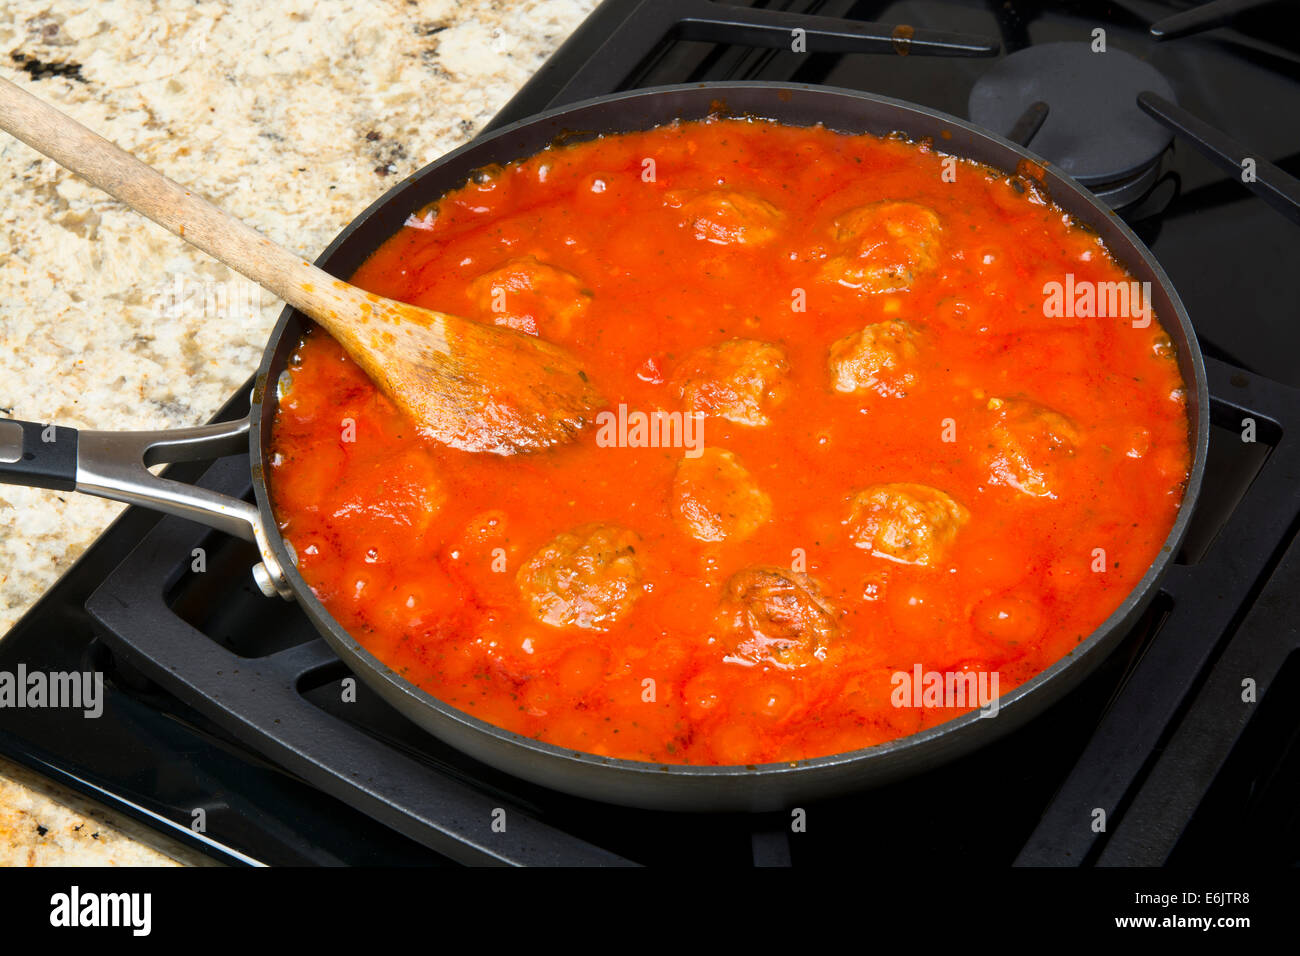 Spaghetti marinara sauce with delicious meatballs simmering in a sauce pan before being added to a pile of pasta. Stock Photo